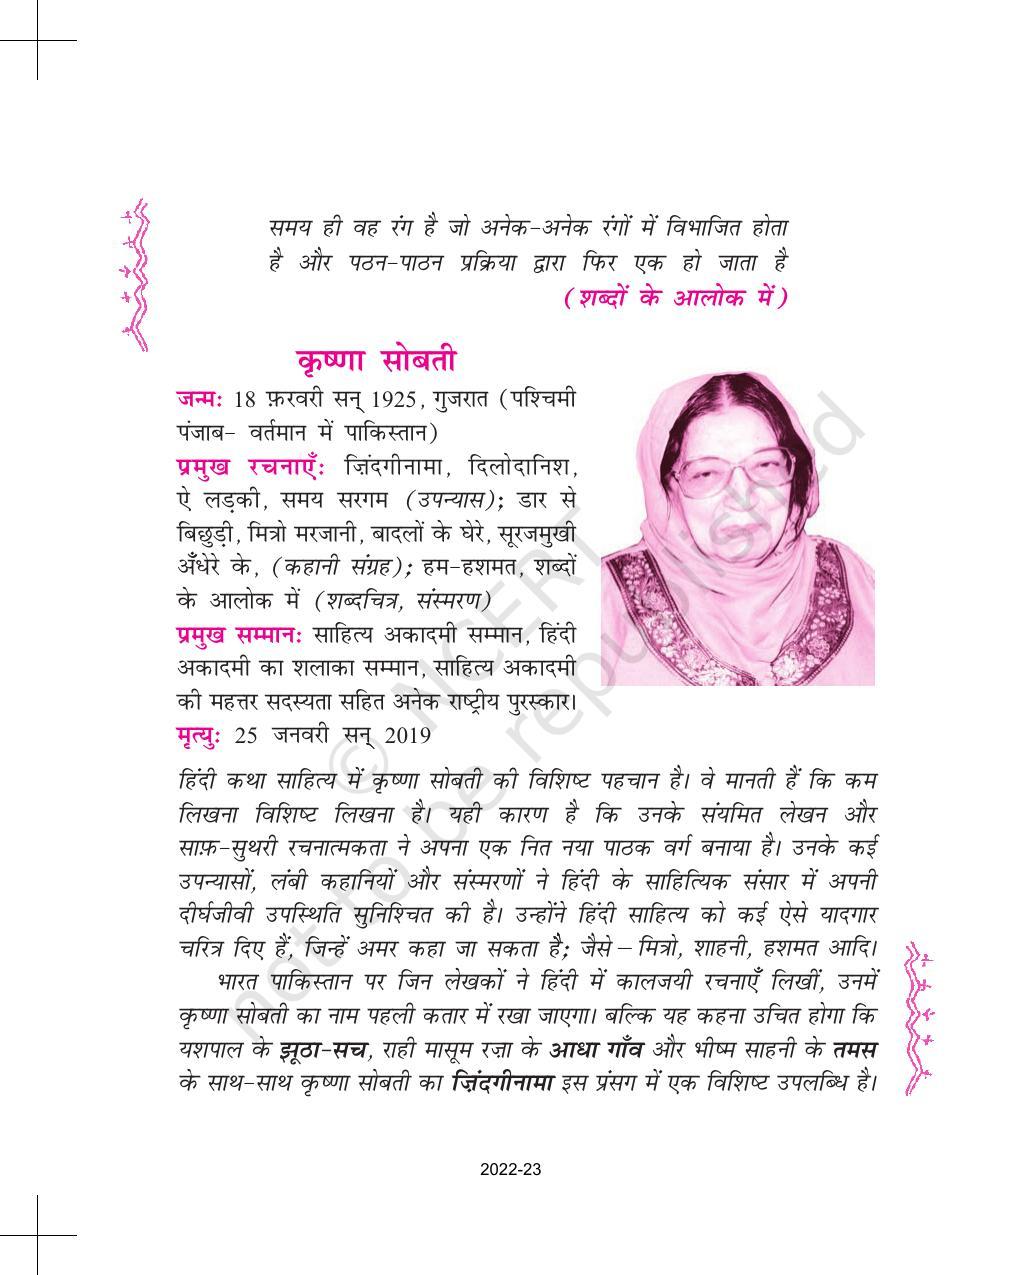 NCERT Book for Class 11 Hindi Aroh Chapter 2 मियाँ नसीरुद्दीन - Page 1